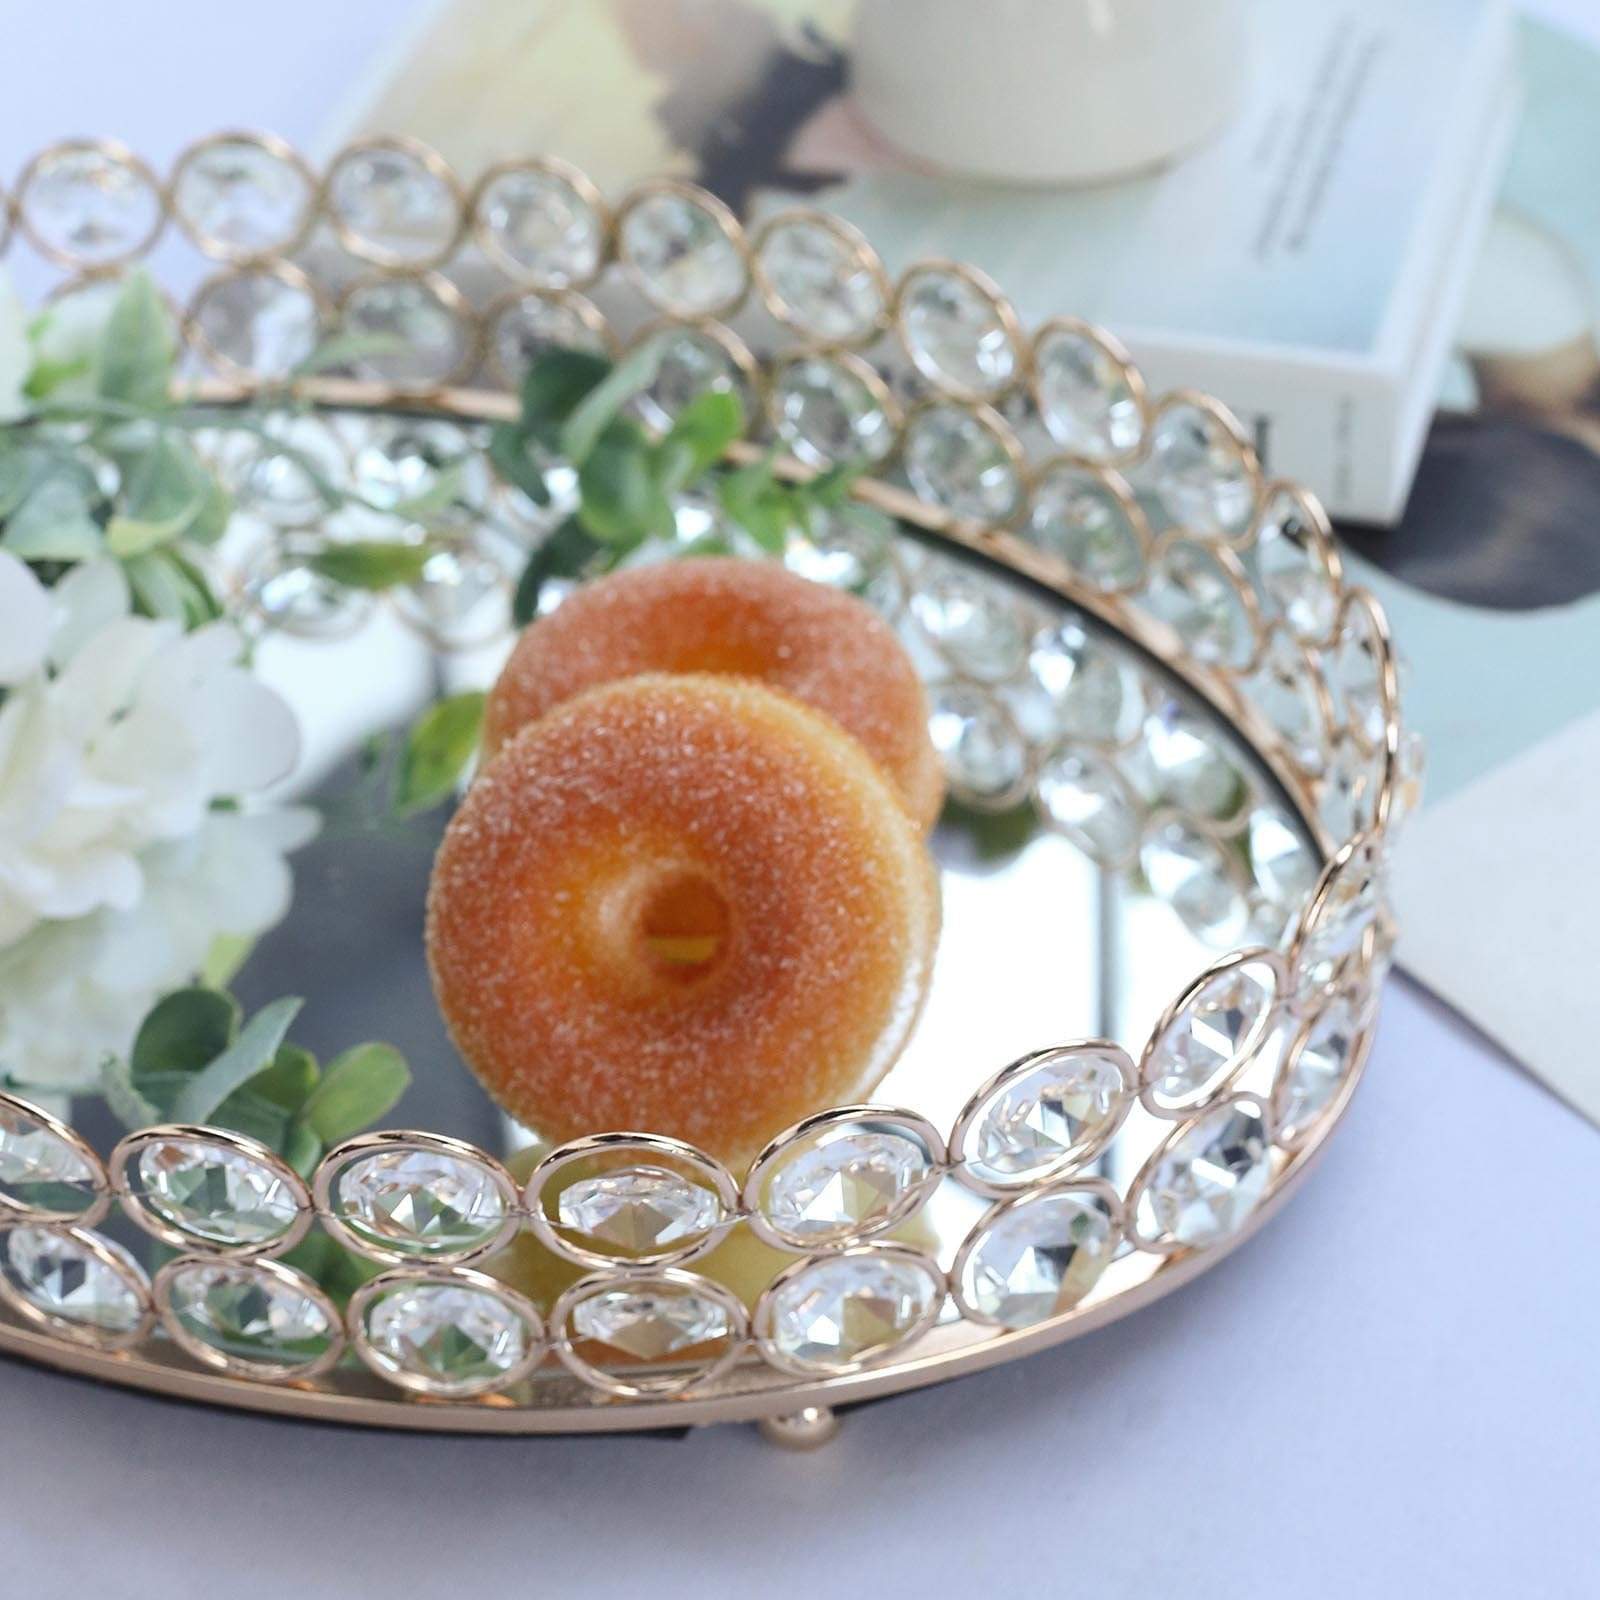 Metal Crystal Beaded Oval Mirror Serving Tray